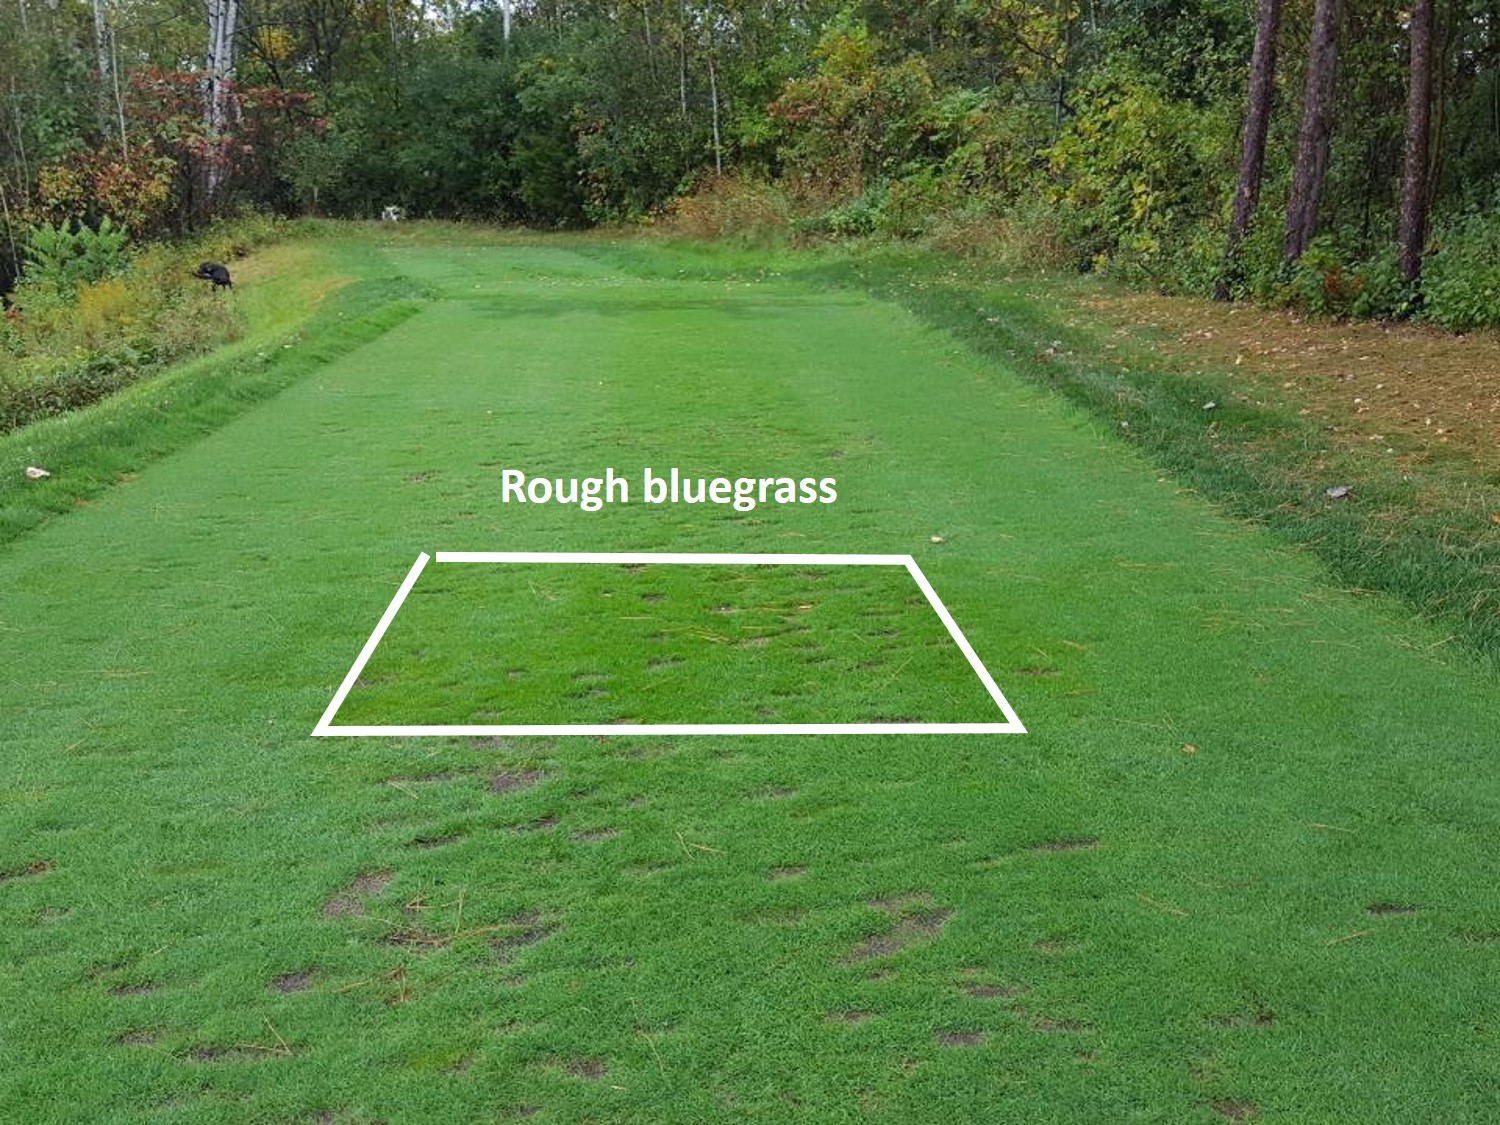 Rough bluegrass plot with better quality turf